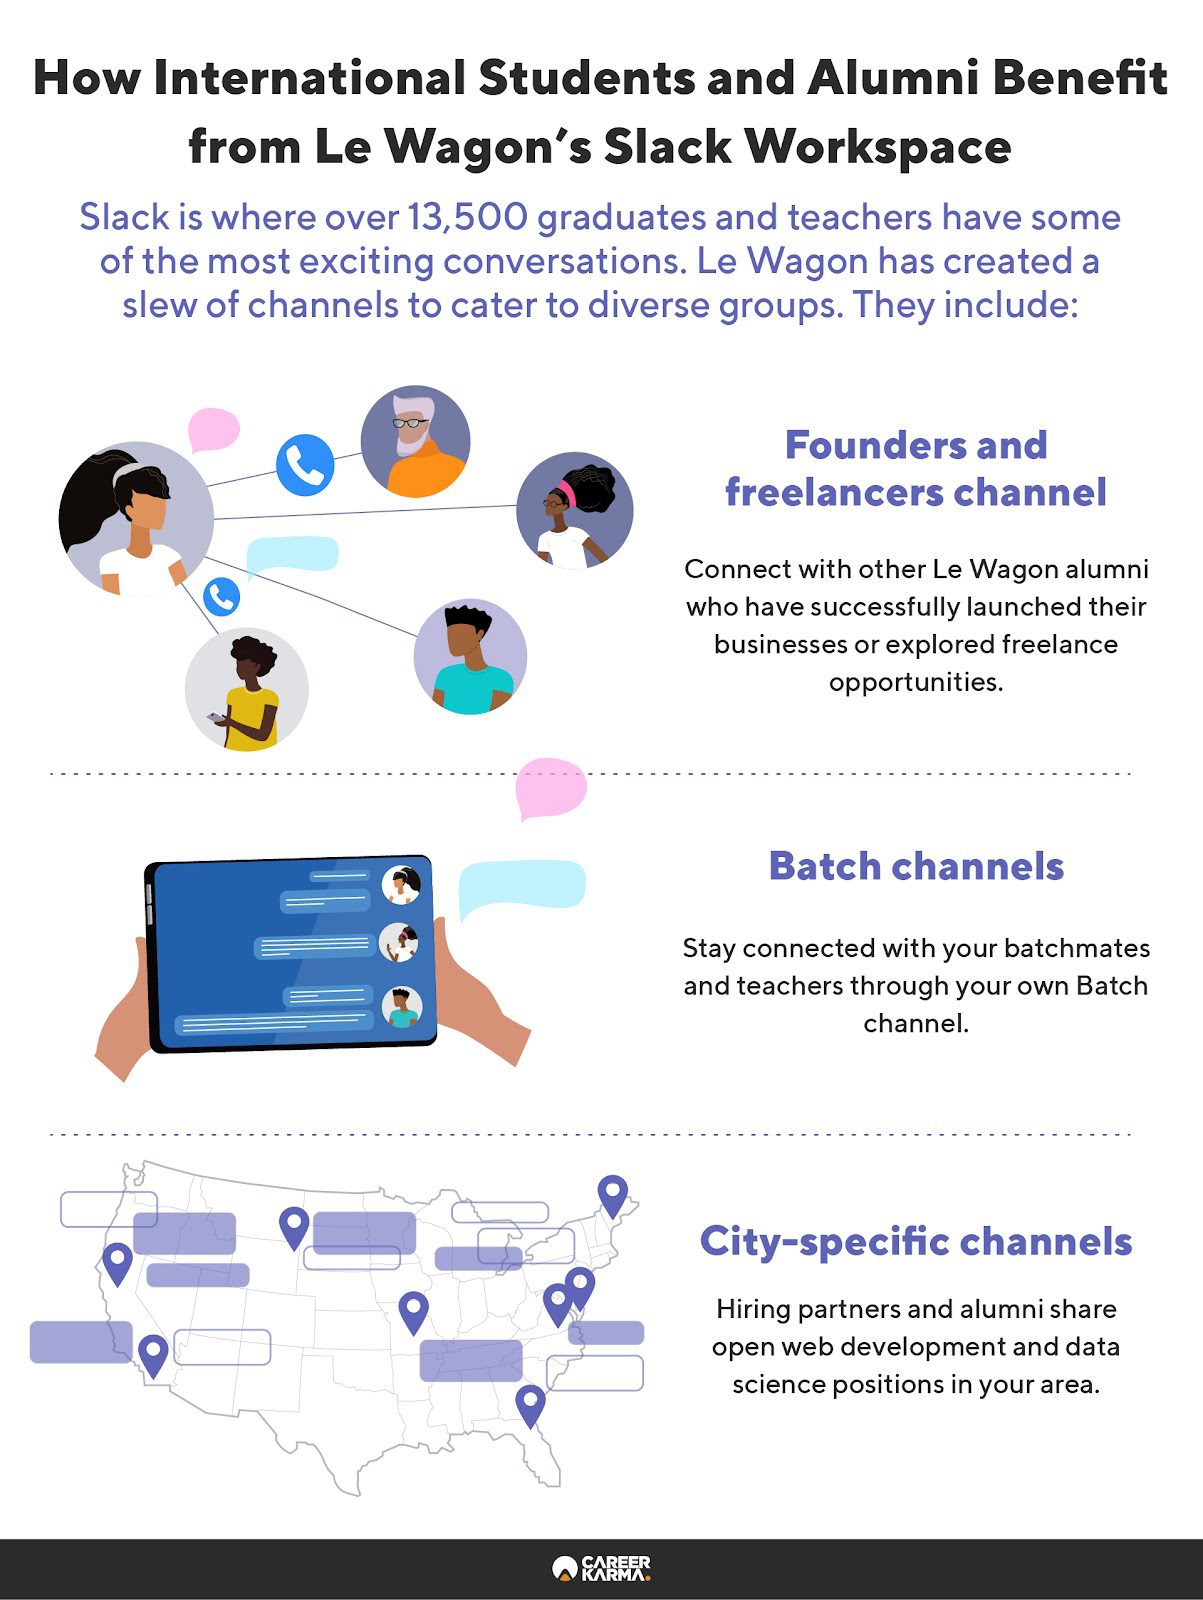 An infographic featuring the benefits of lifetime access to Le Wagon’s Slack workspace